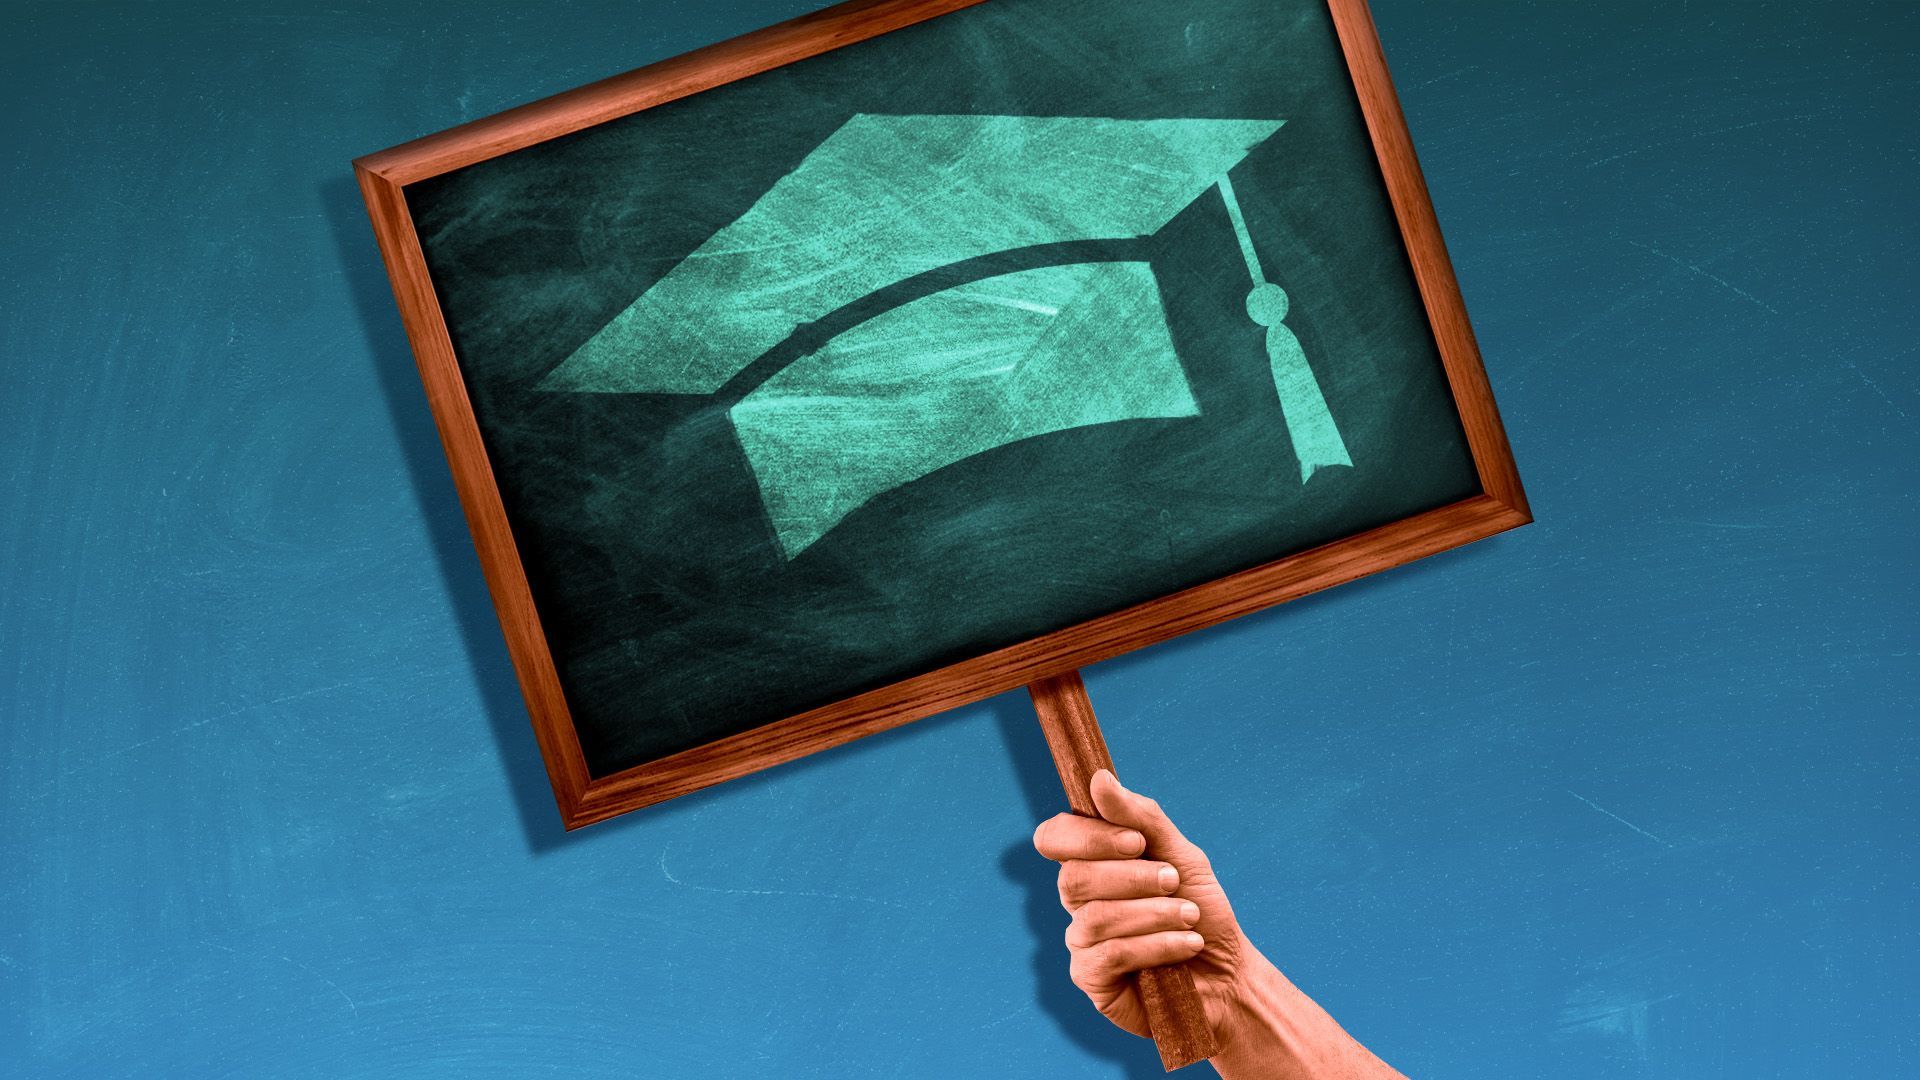 Illustration of a hand holding a protest sign in the shape of chalkboard with a graduation cap 